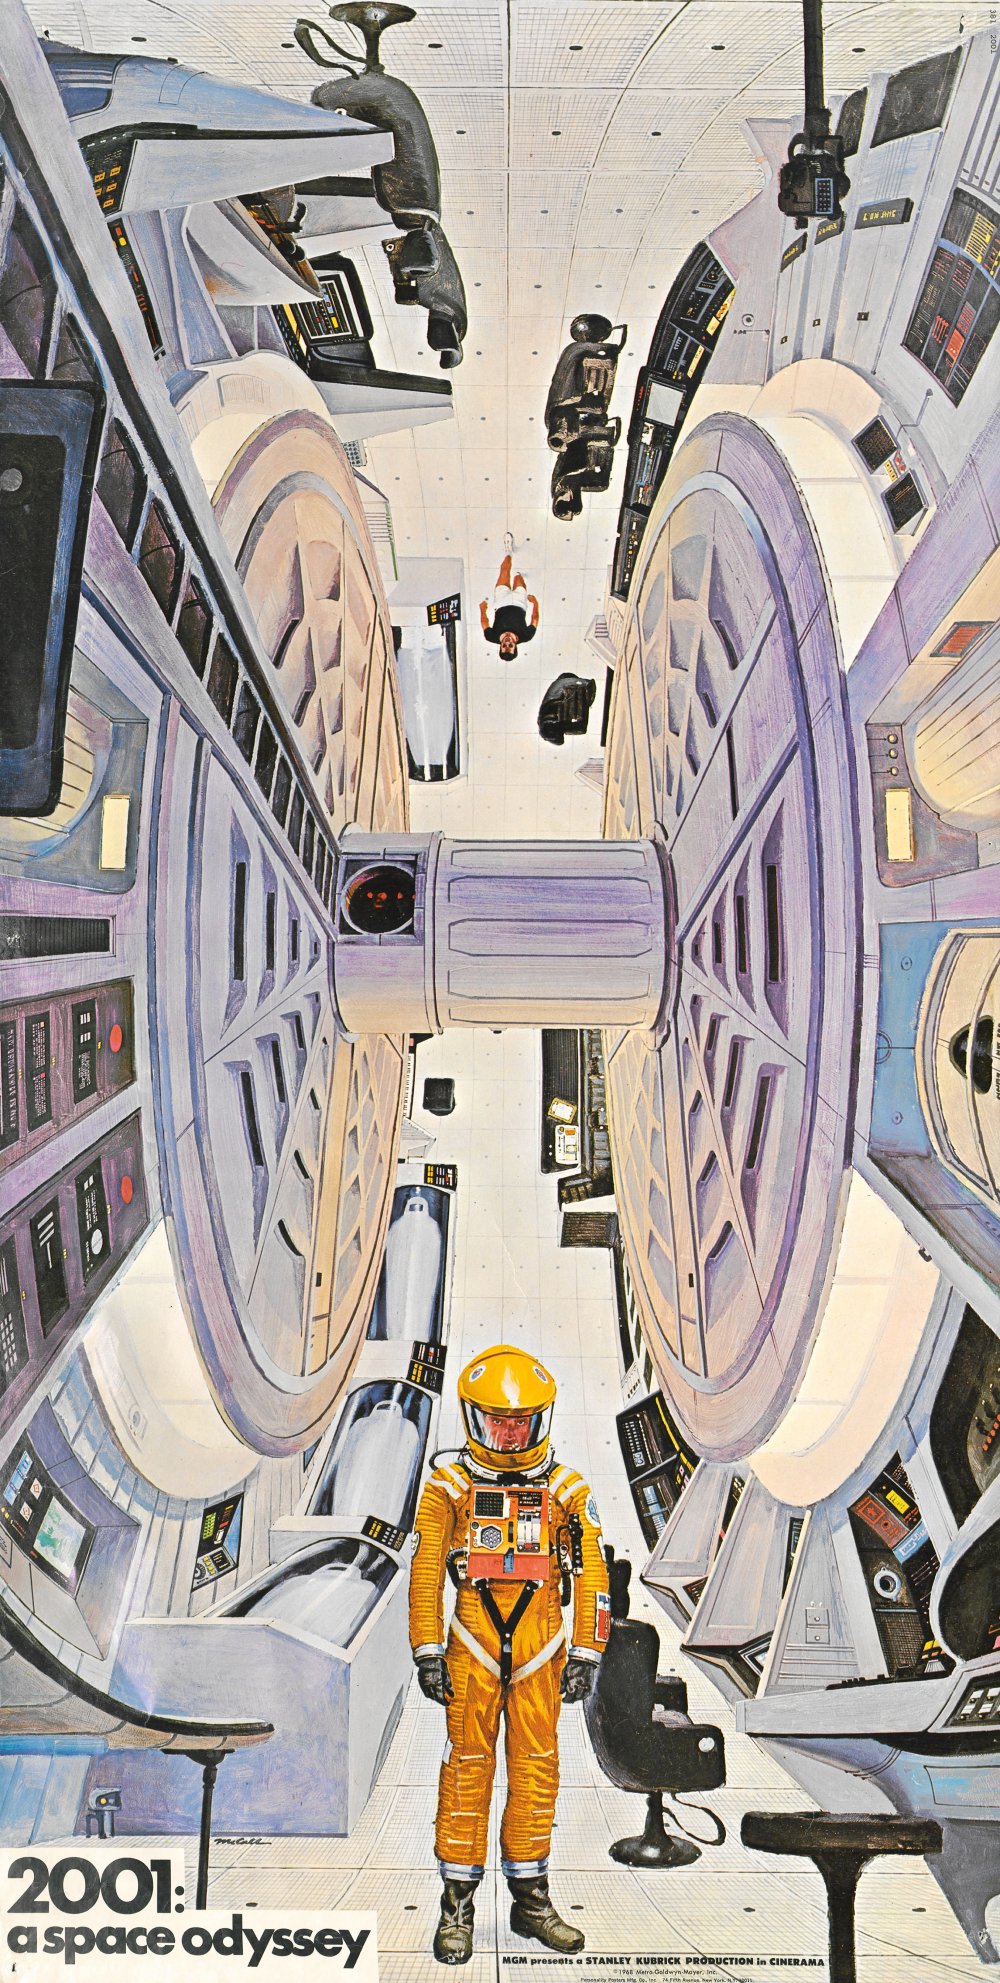 2001: A Space Odyssey (1968) limited edition print